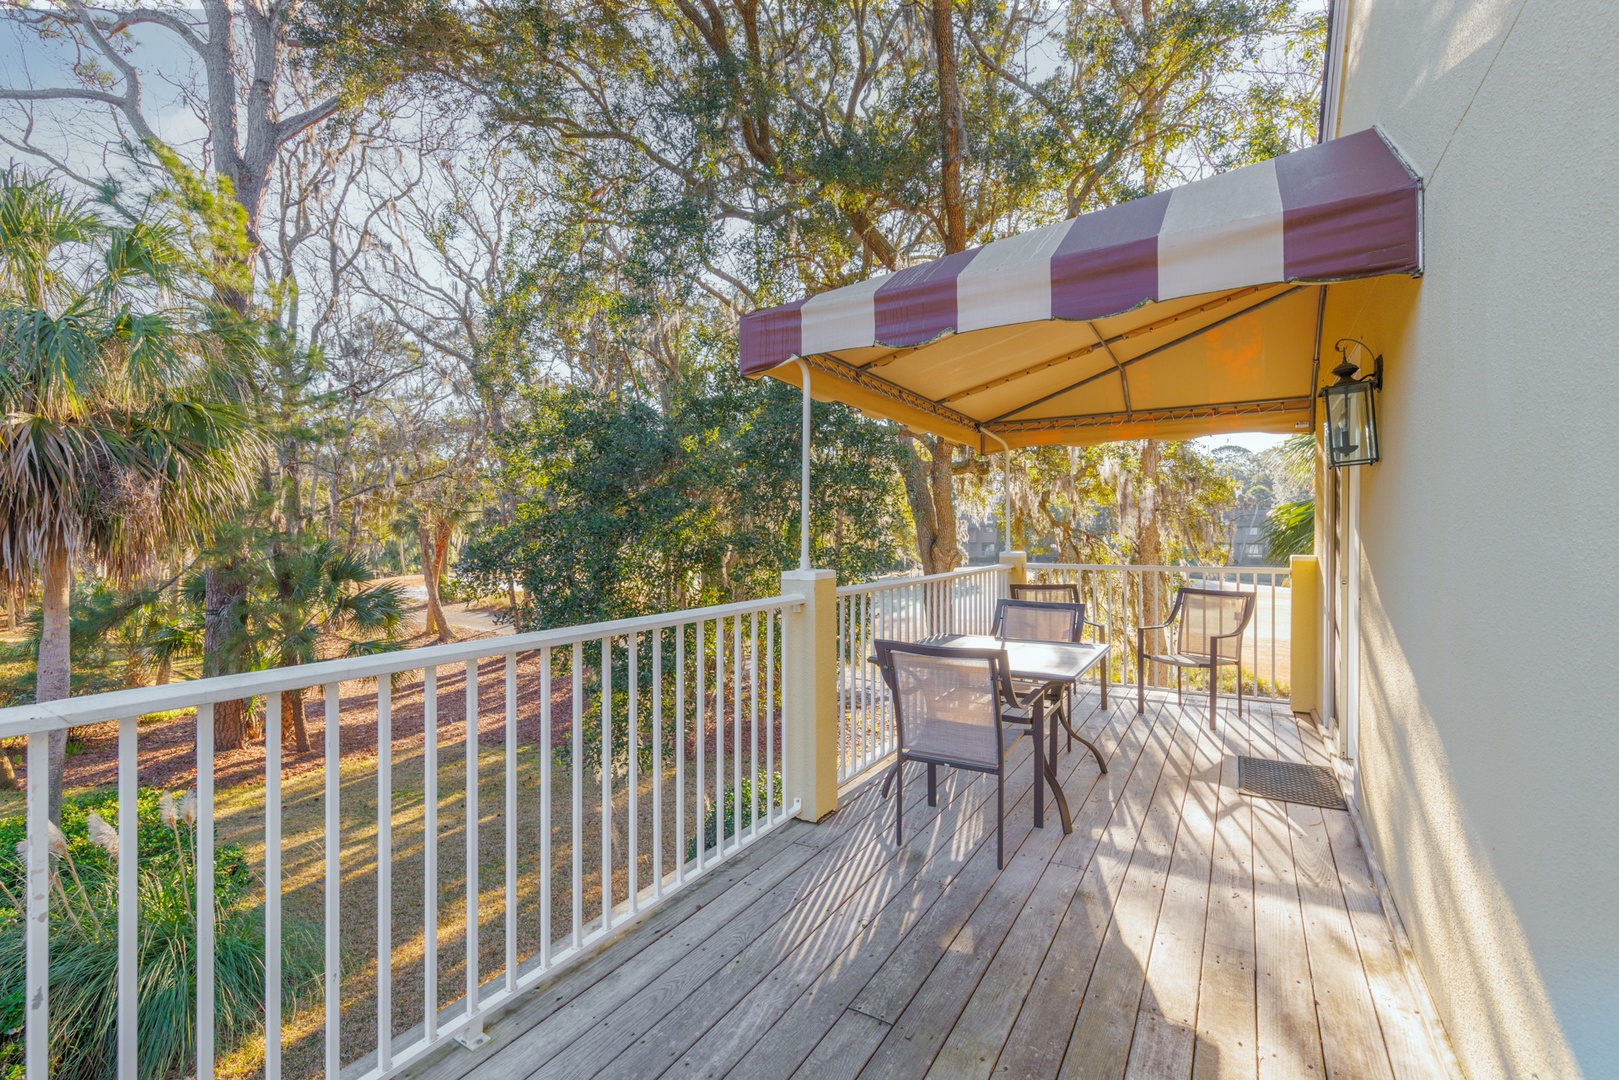 Take in scenic views from the elevated second-floor deck